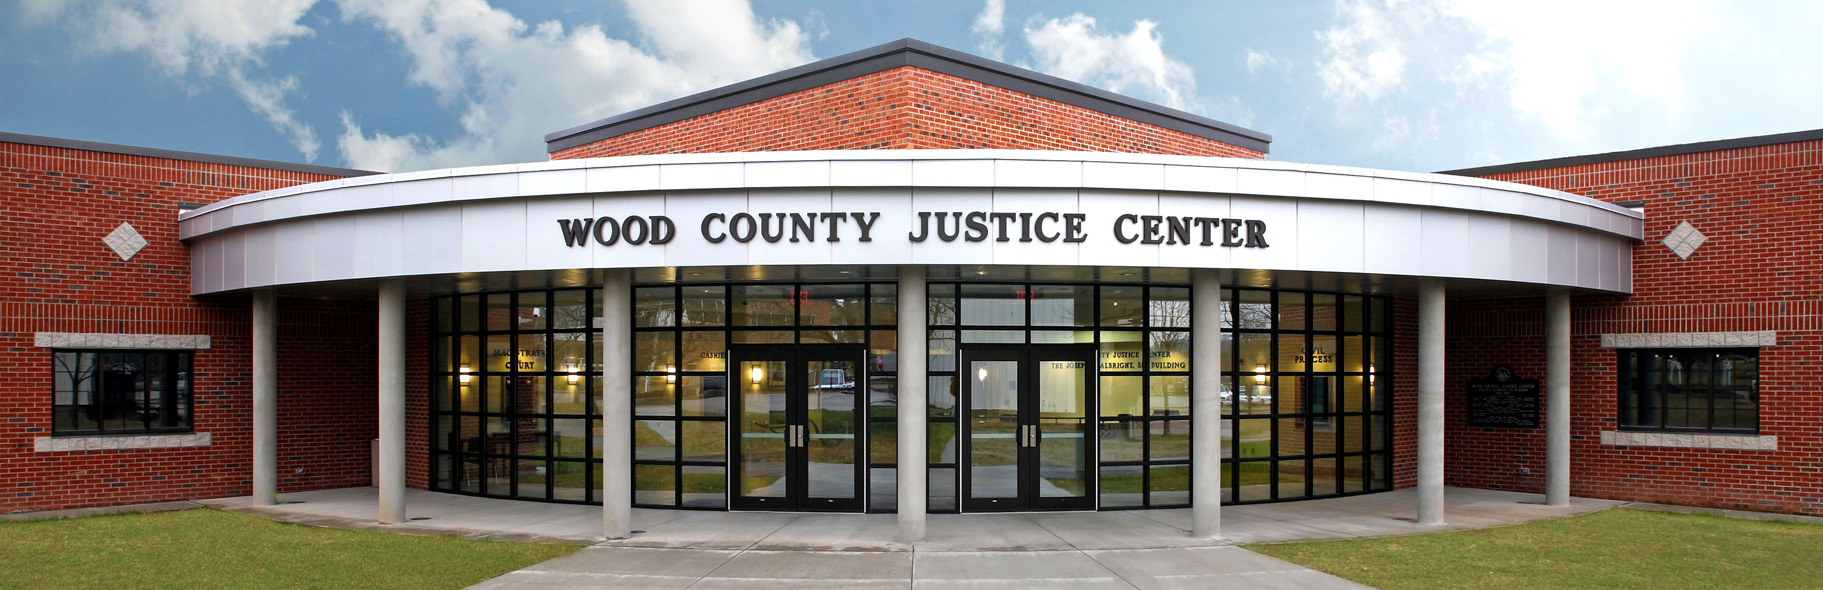 Wood County Justice Center